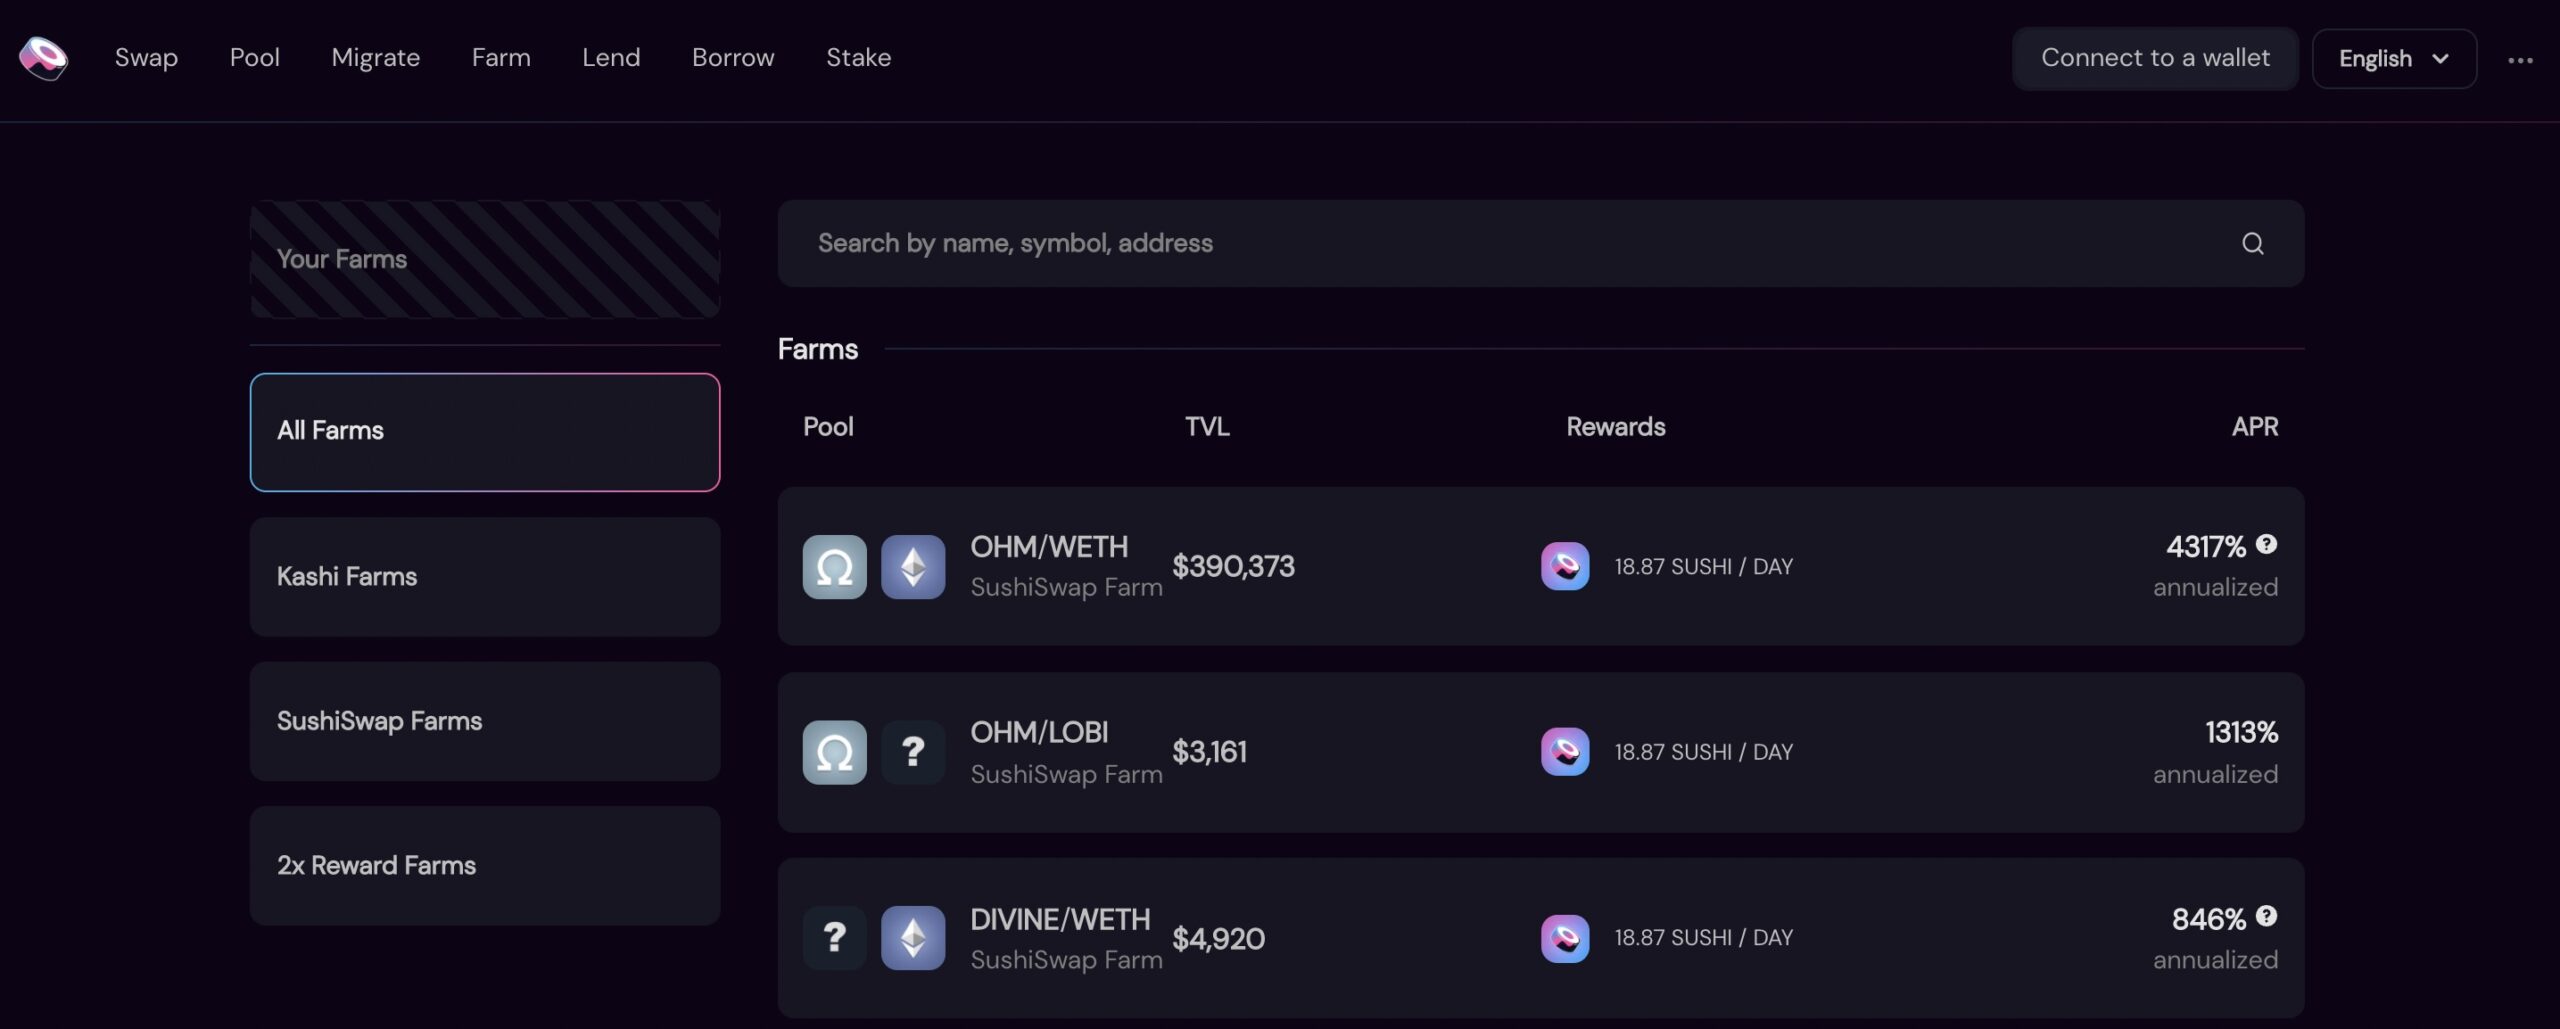 a screenshot from sushiswap displaying some defi yield farms and their APR